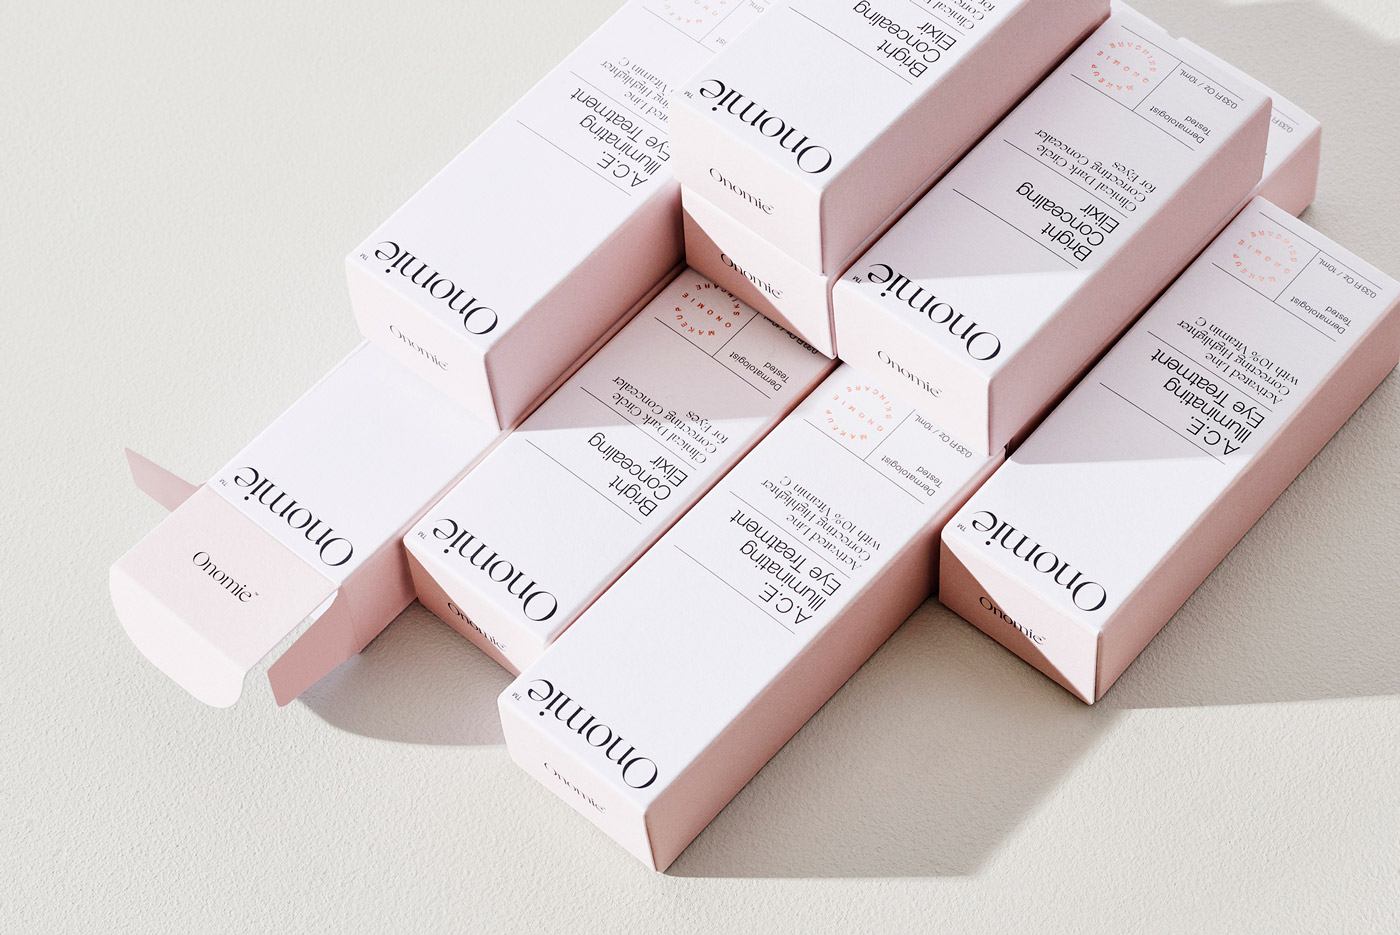 Onomie Beauty – Brand identity and packaging